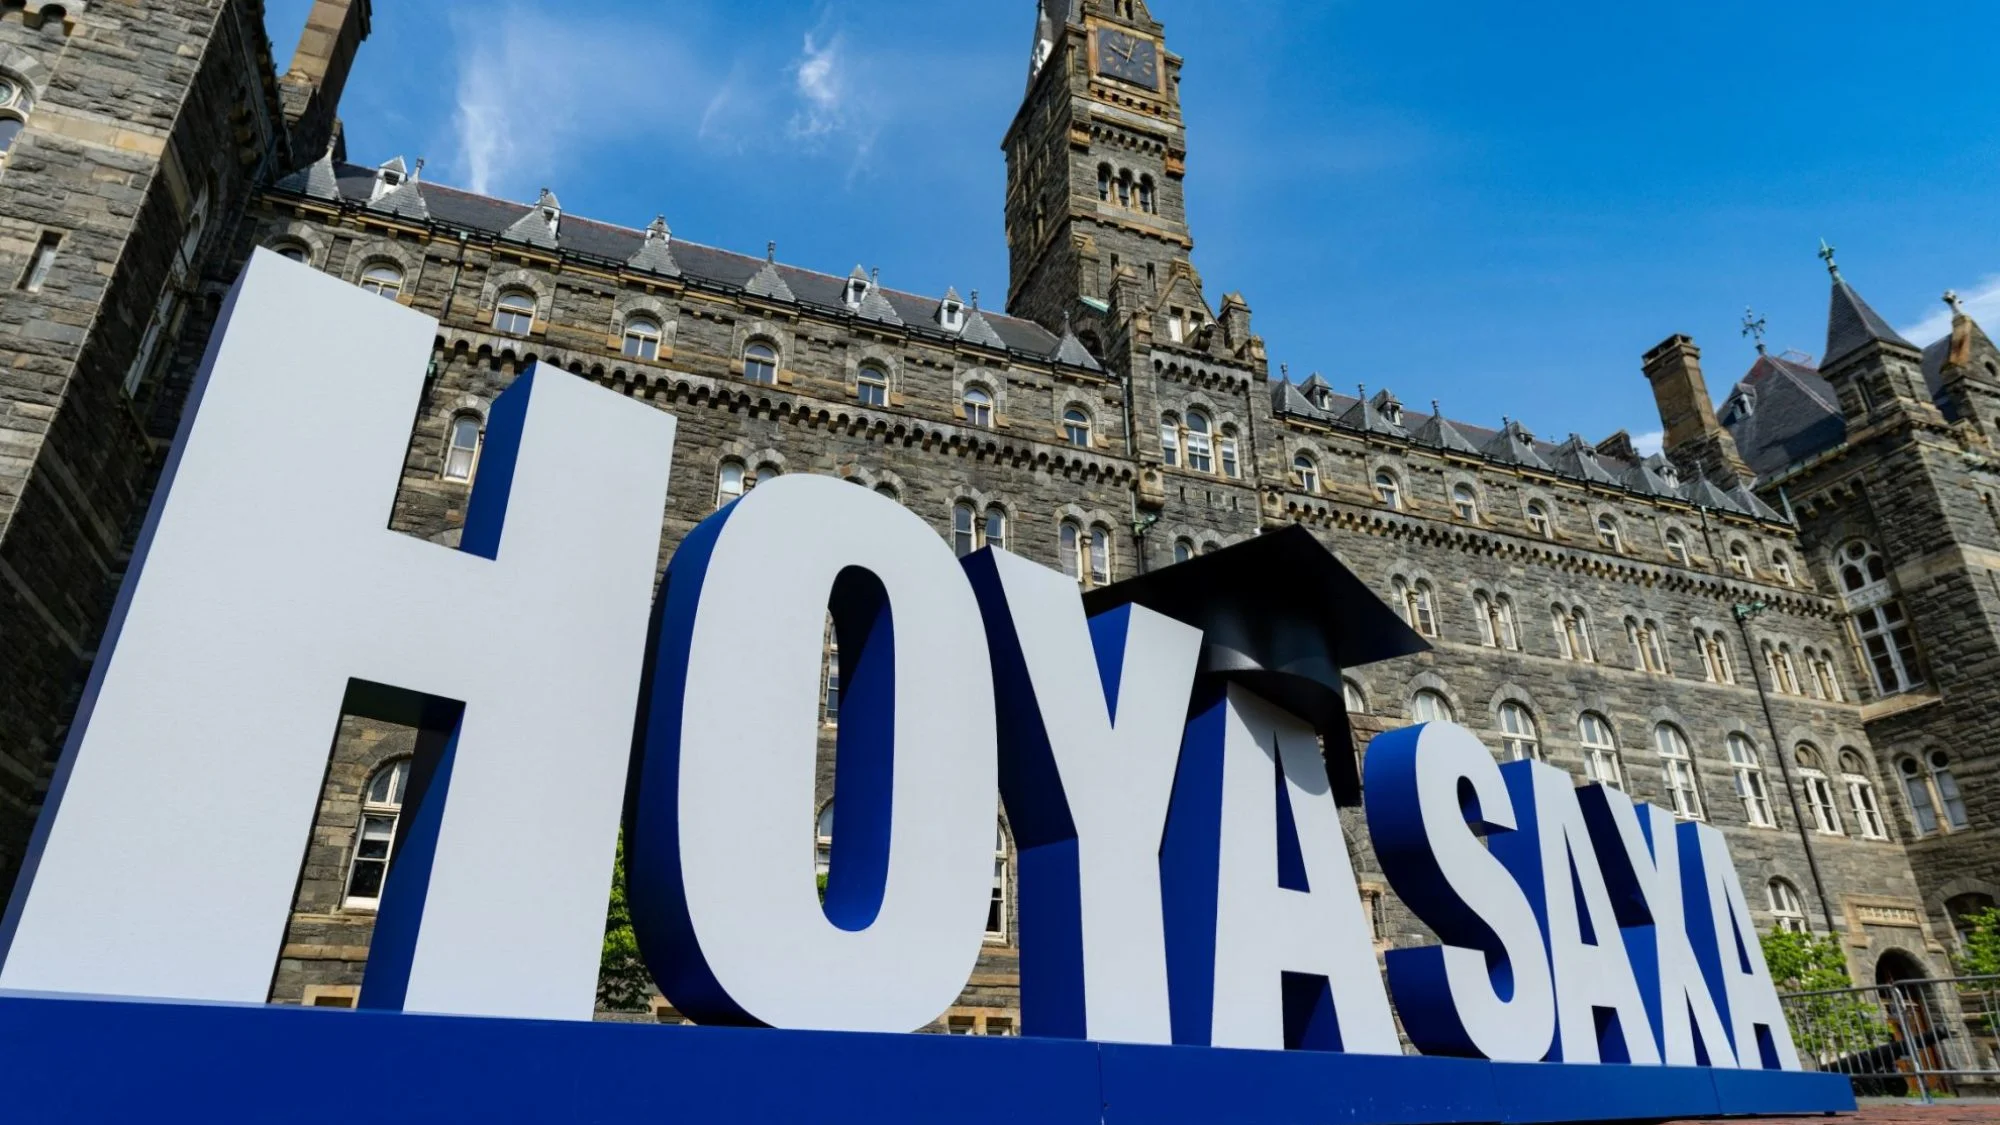 A large white sign reading Hoya Saxa rests on the ground in front of a gray stone building.